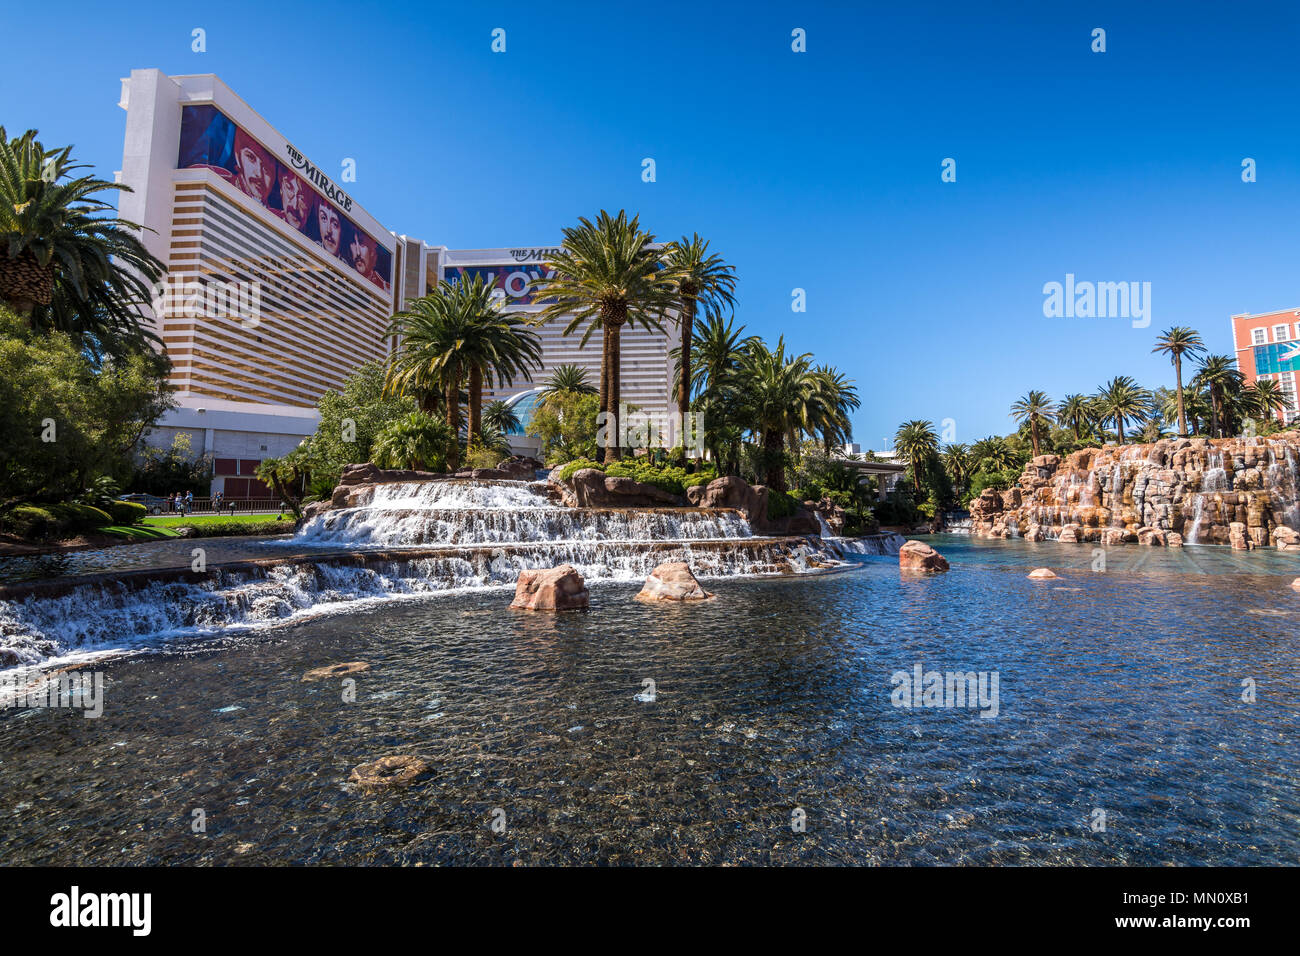 Las Vegas, US - April 26, 2018: Fountains and the famous Mirage hotel in Las Vegas as seen on a sunny day Stock Photo